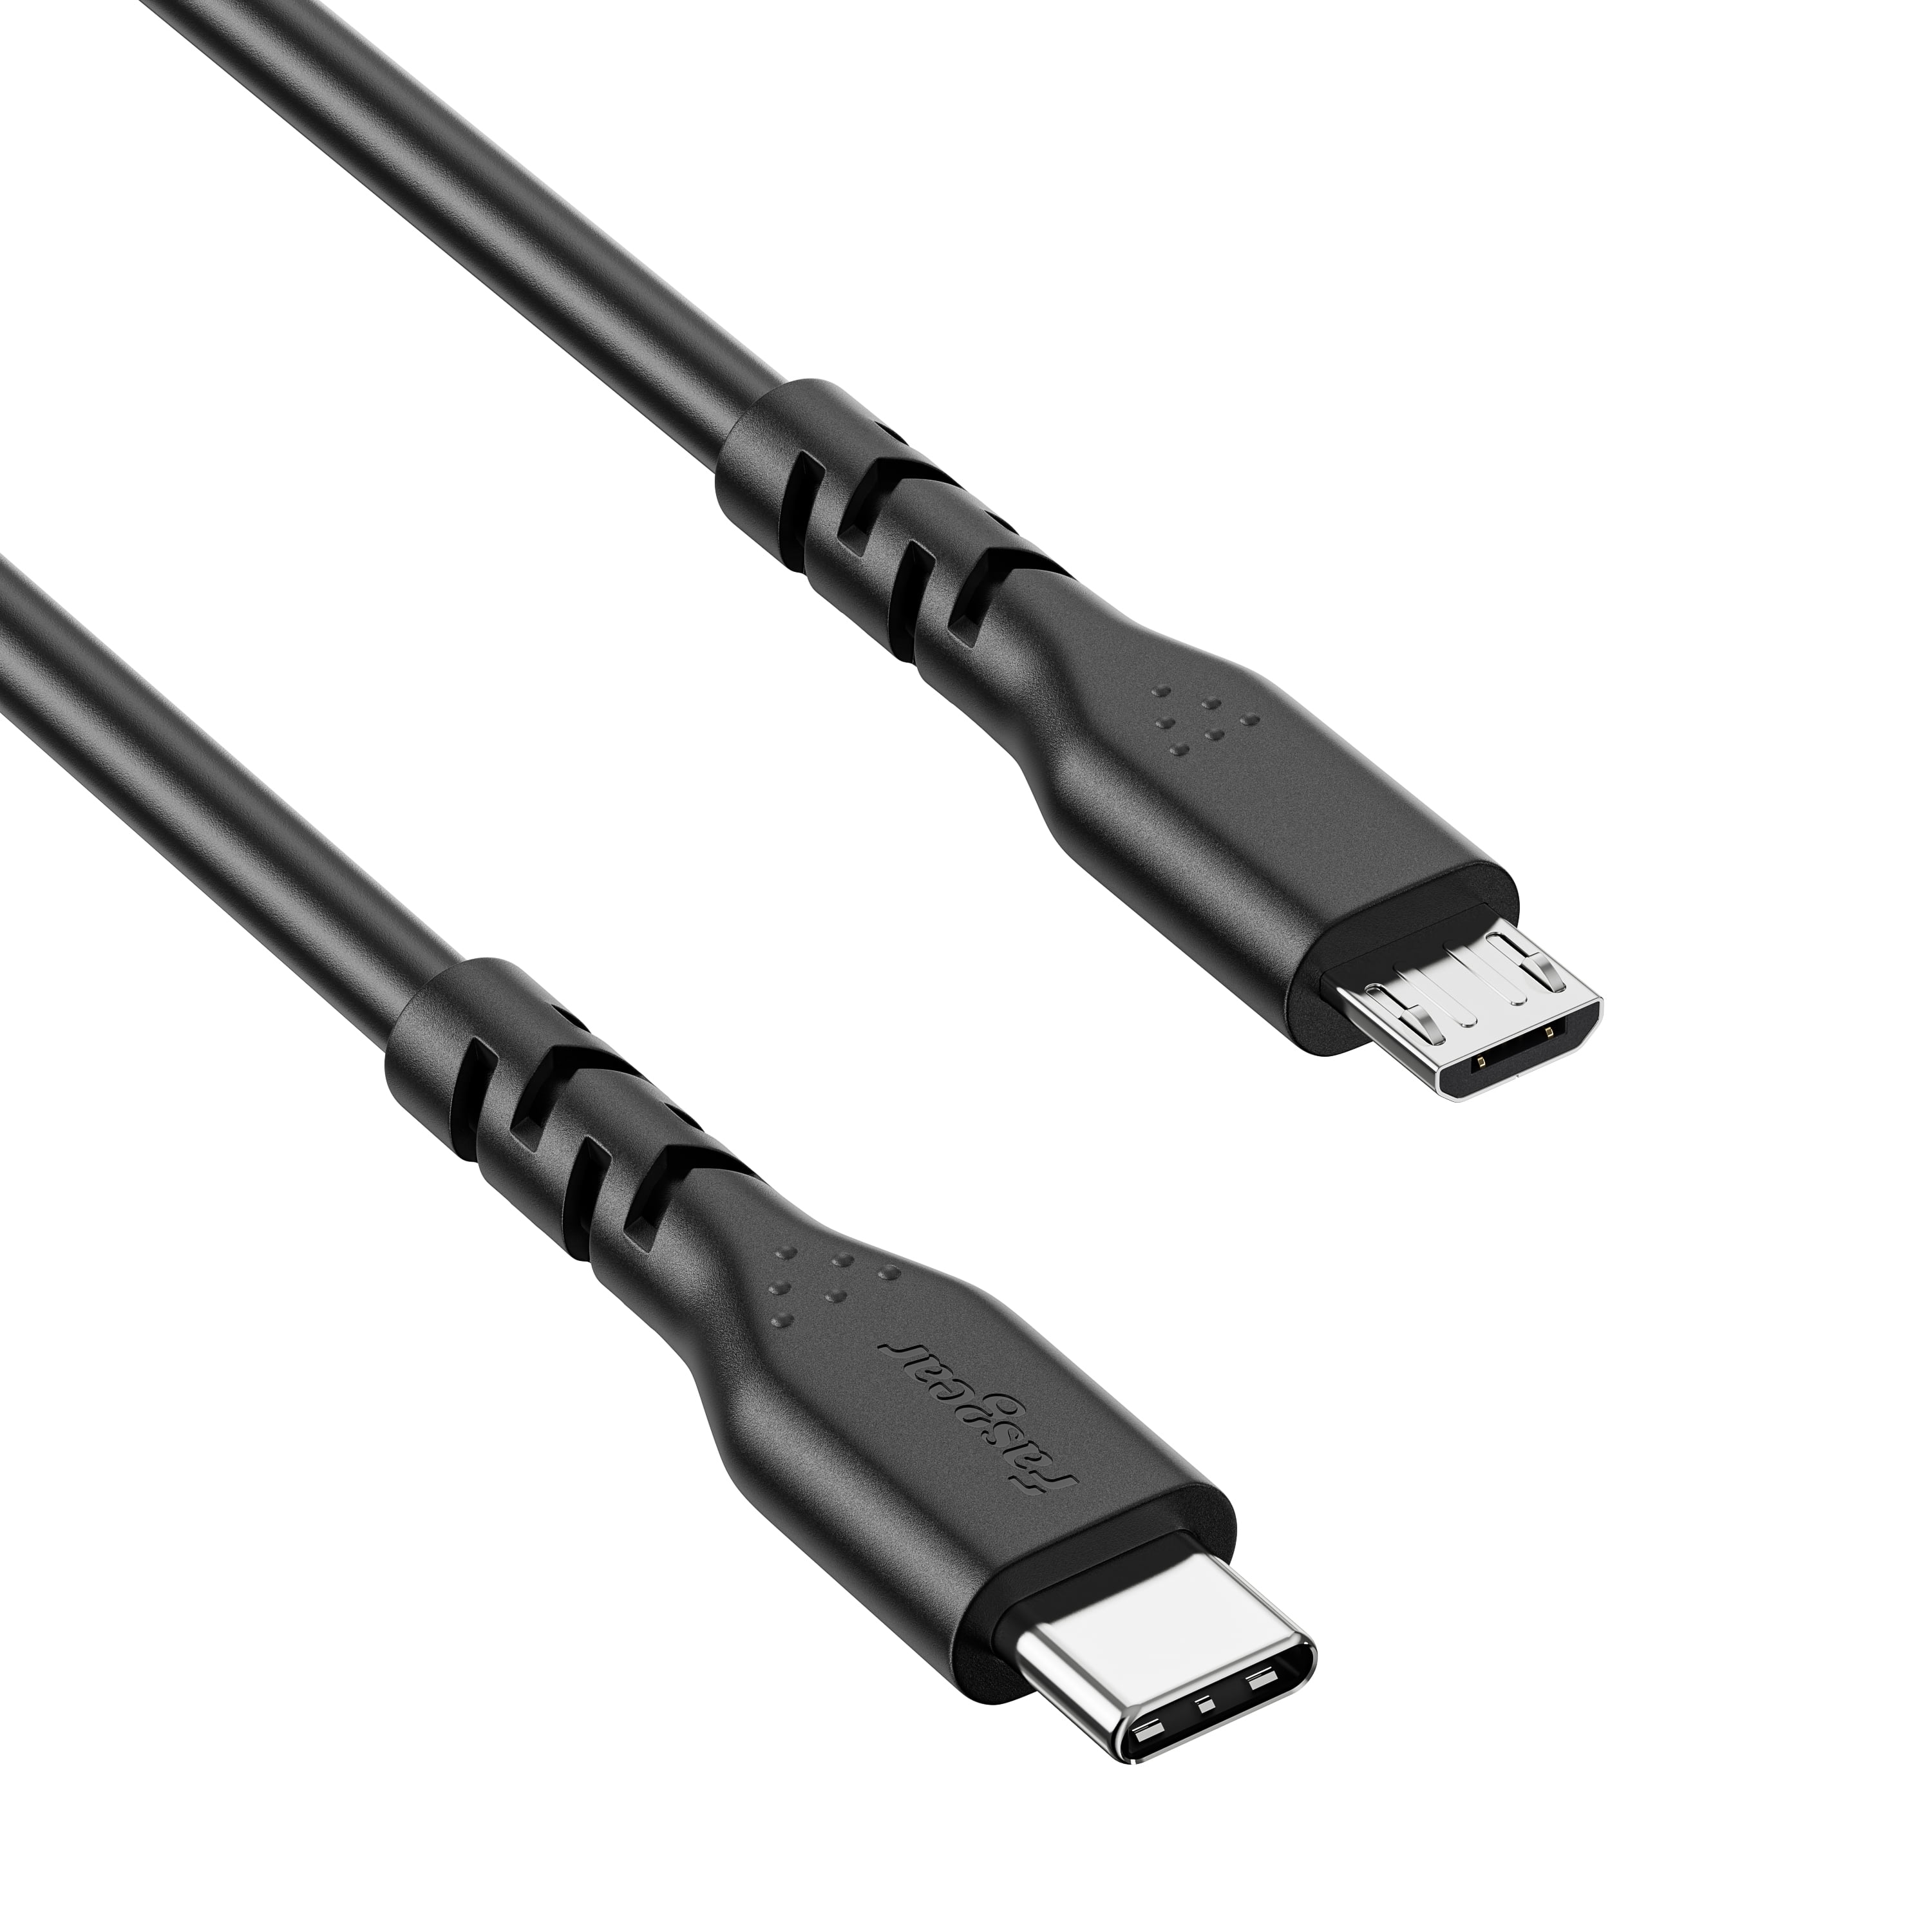 Fasgear 3ft Type C to USB B Cable Nylon Braided 2.0 Printer Scanner Cord  with Metal Connector Compatible with AiO, HP, Canon, Samsung Printers and